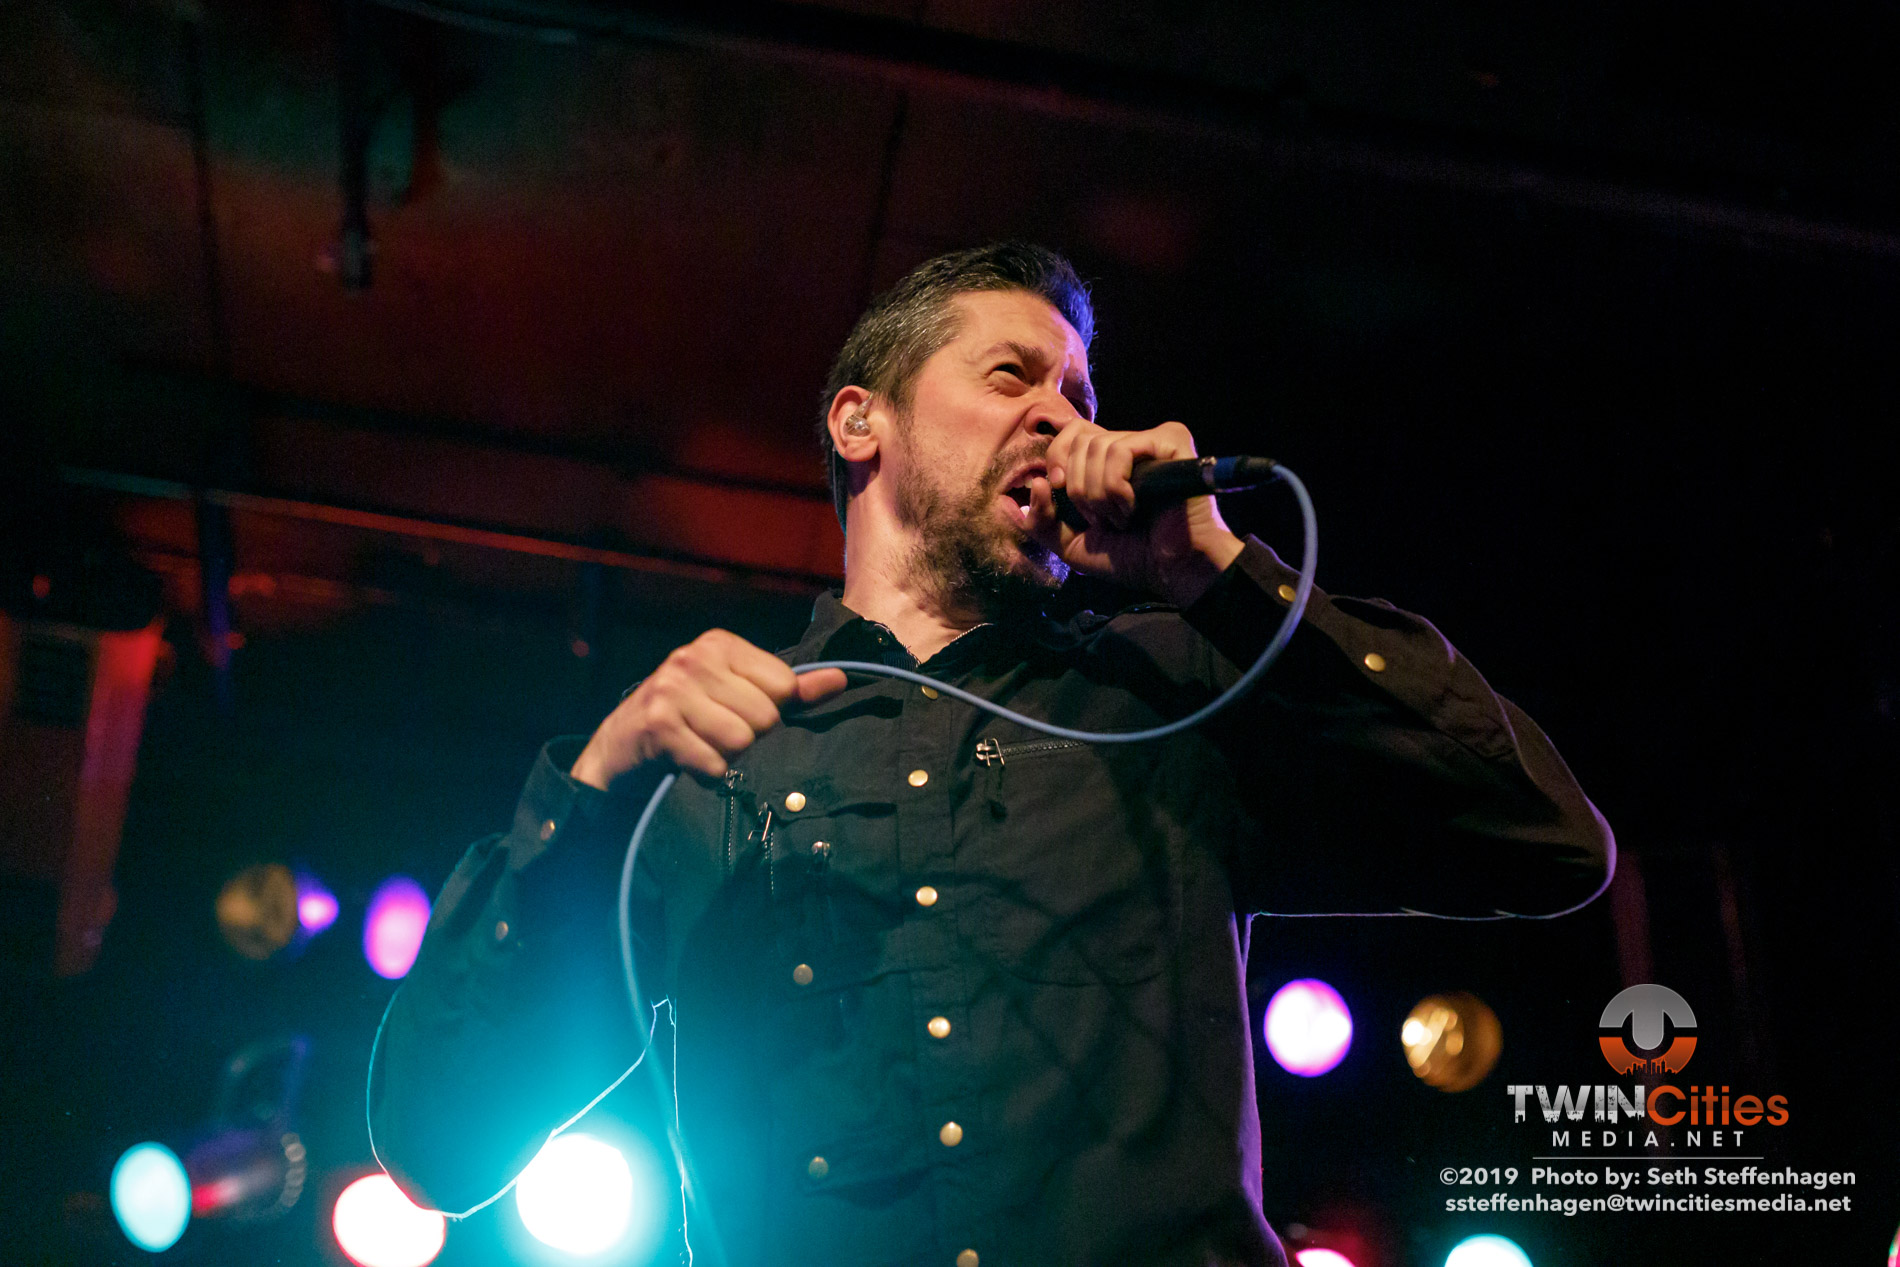 October 5, 2019 - Minneapolis, Minnesota, United States -  Gone In April live in concert at The Cabooze opening for Eluveitie + Korpiklaani.

(Photo by Seth Steffenhagen/Steffenhagen Photography)